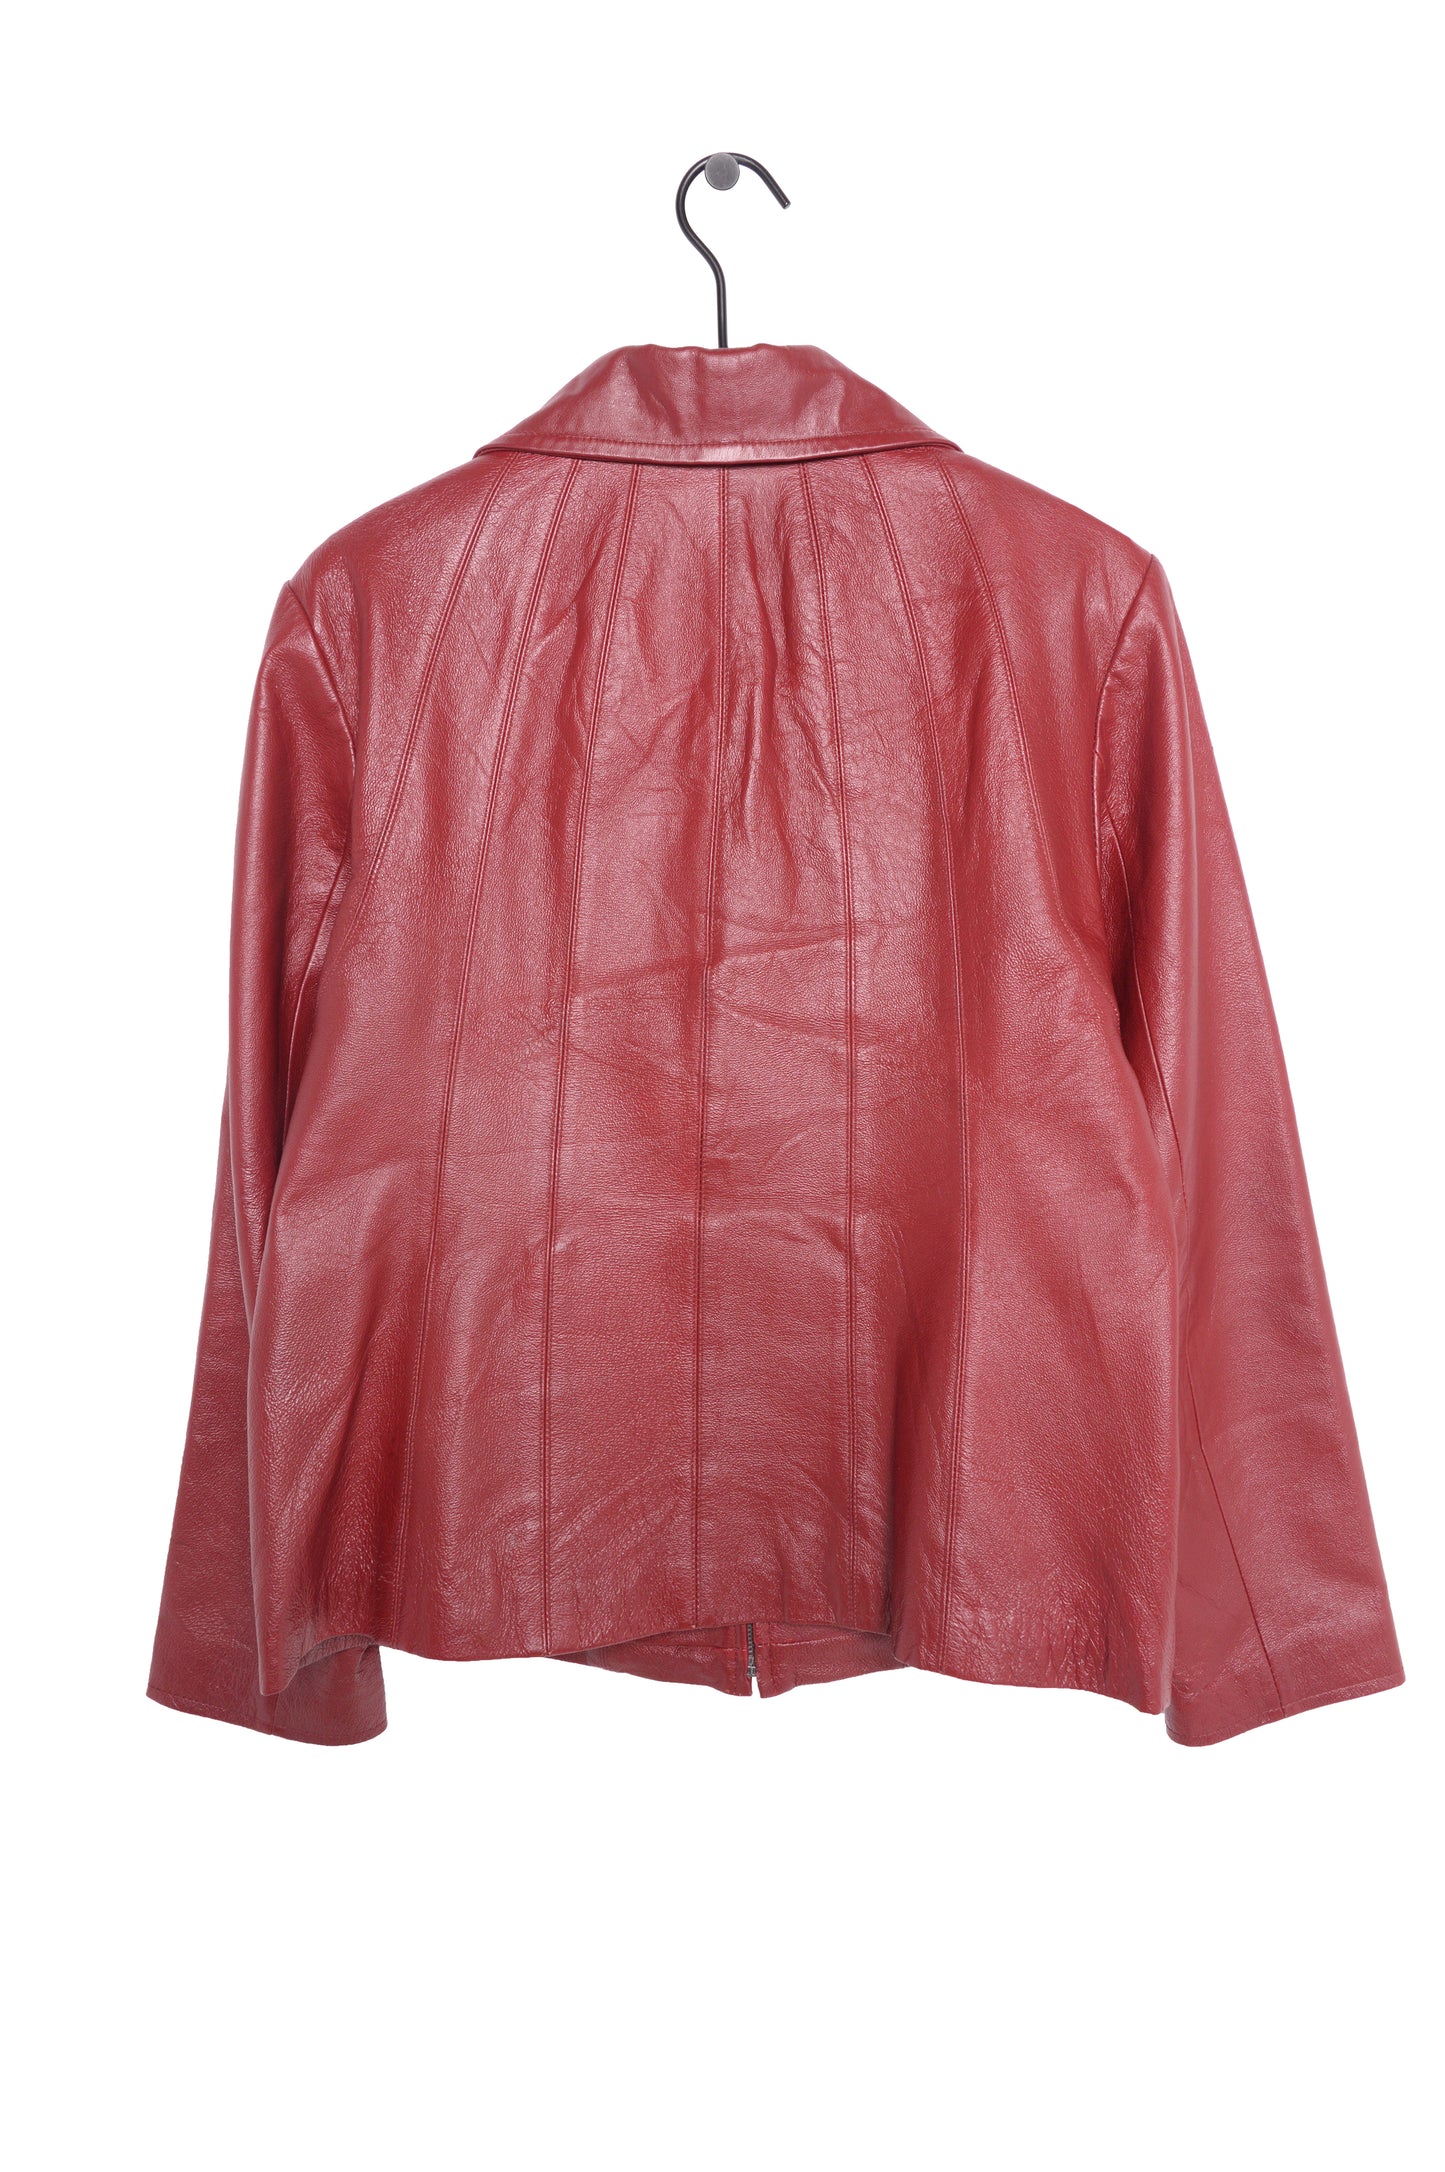 Y2K Red Leather Jacket